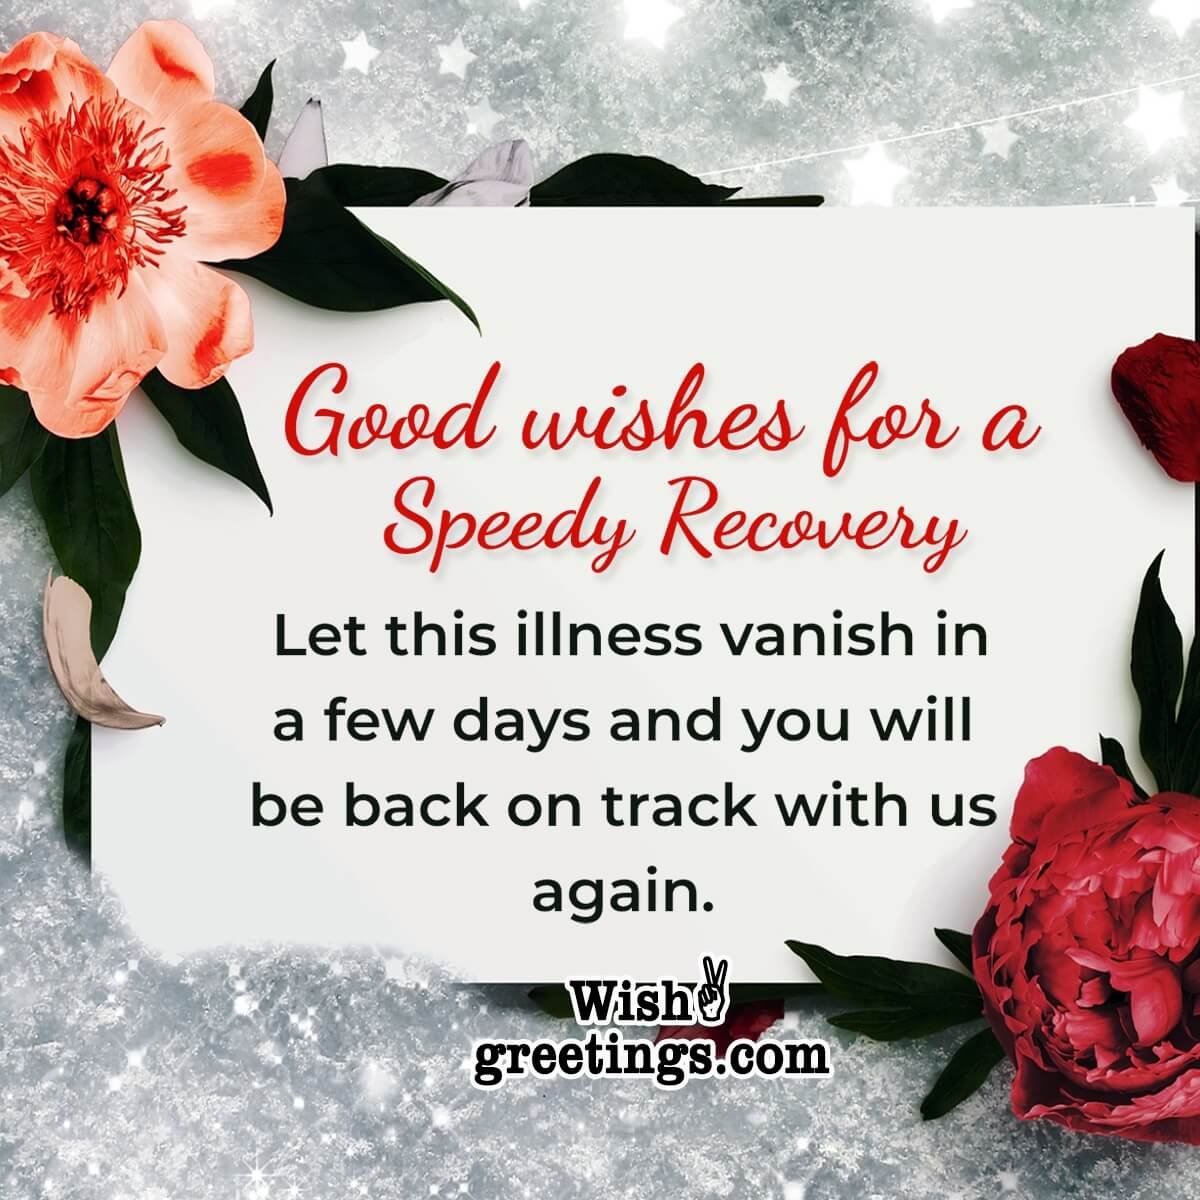 Get Well Wishes for Fast Recovery - Wish Greetings